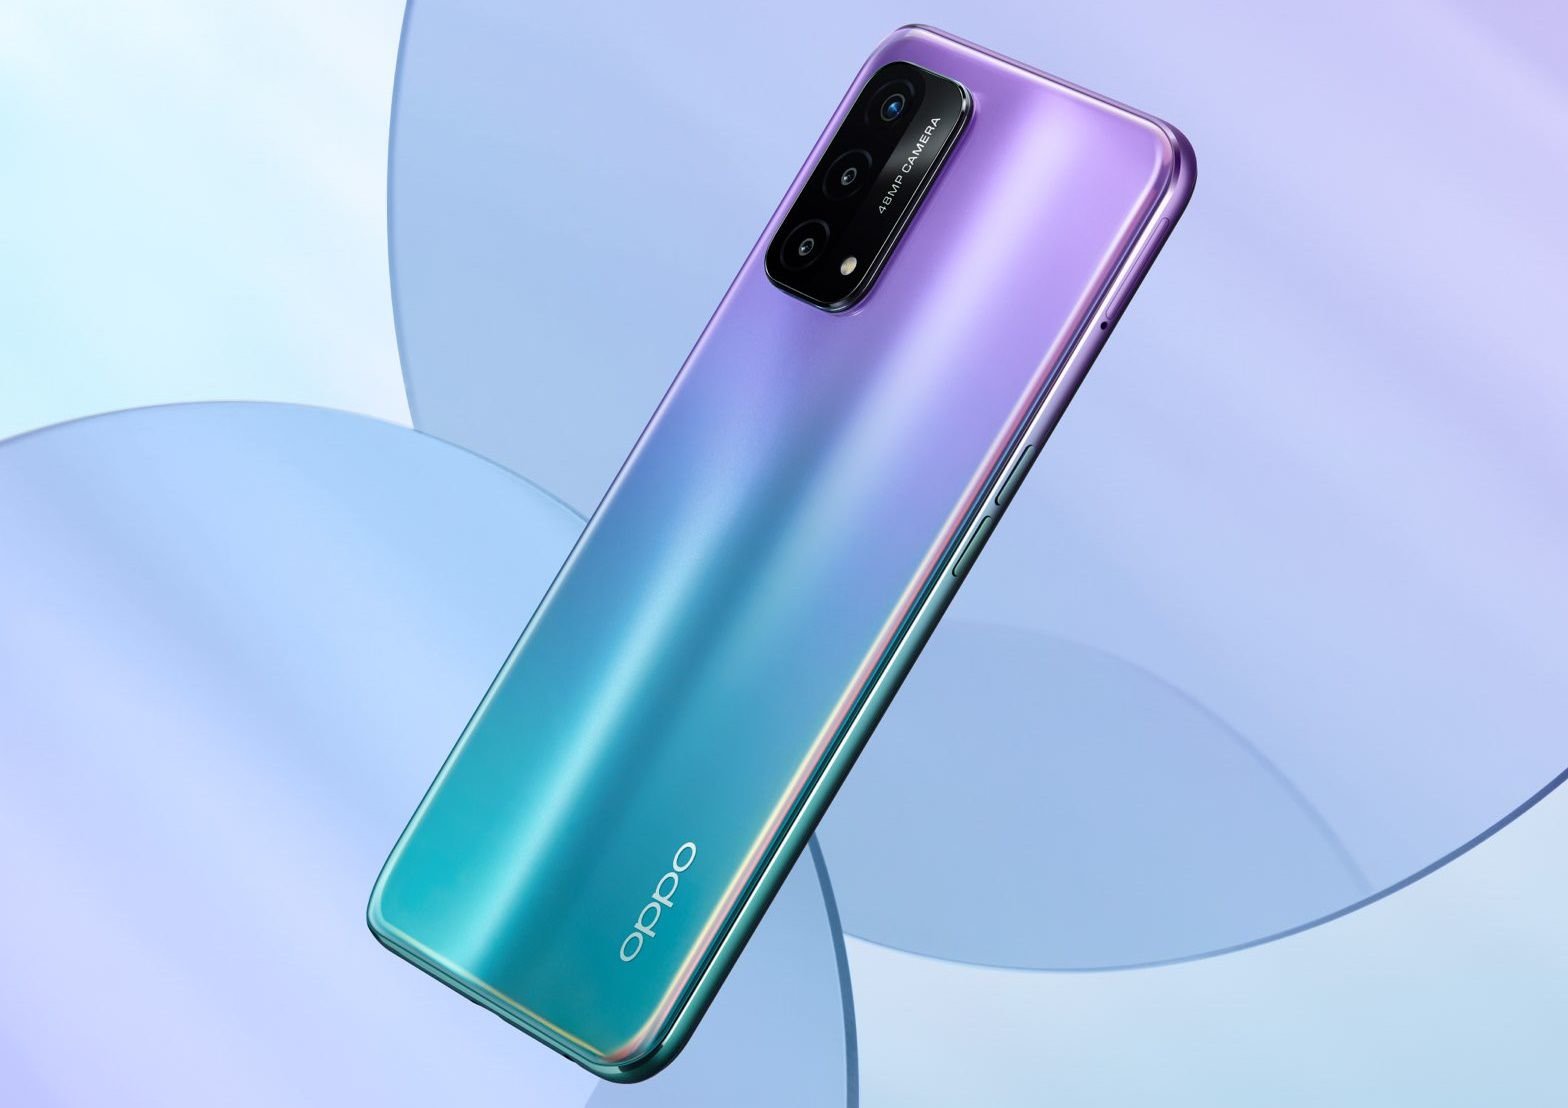 OPPO A93 5G debut as the second smartphone with Snapdragon 480 CPU